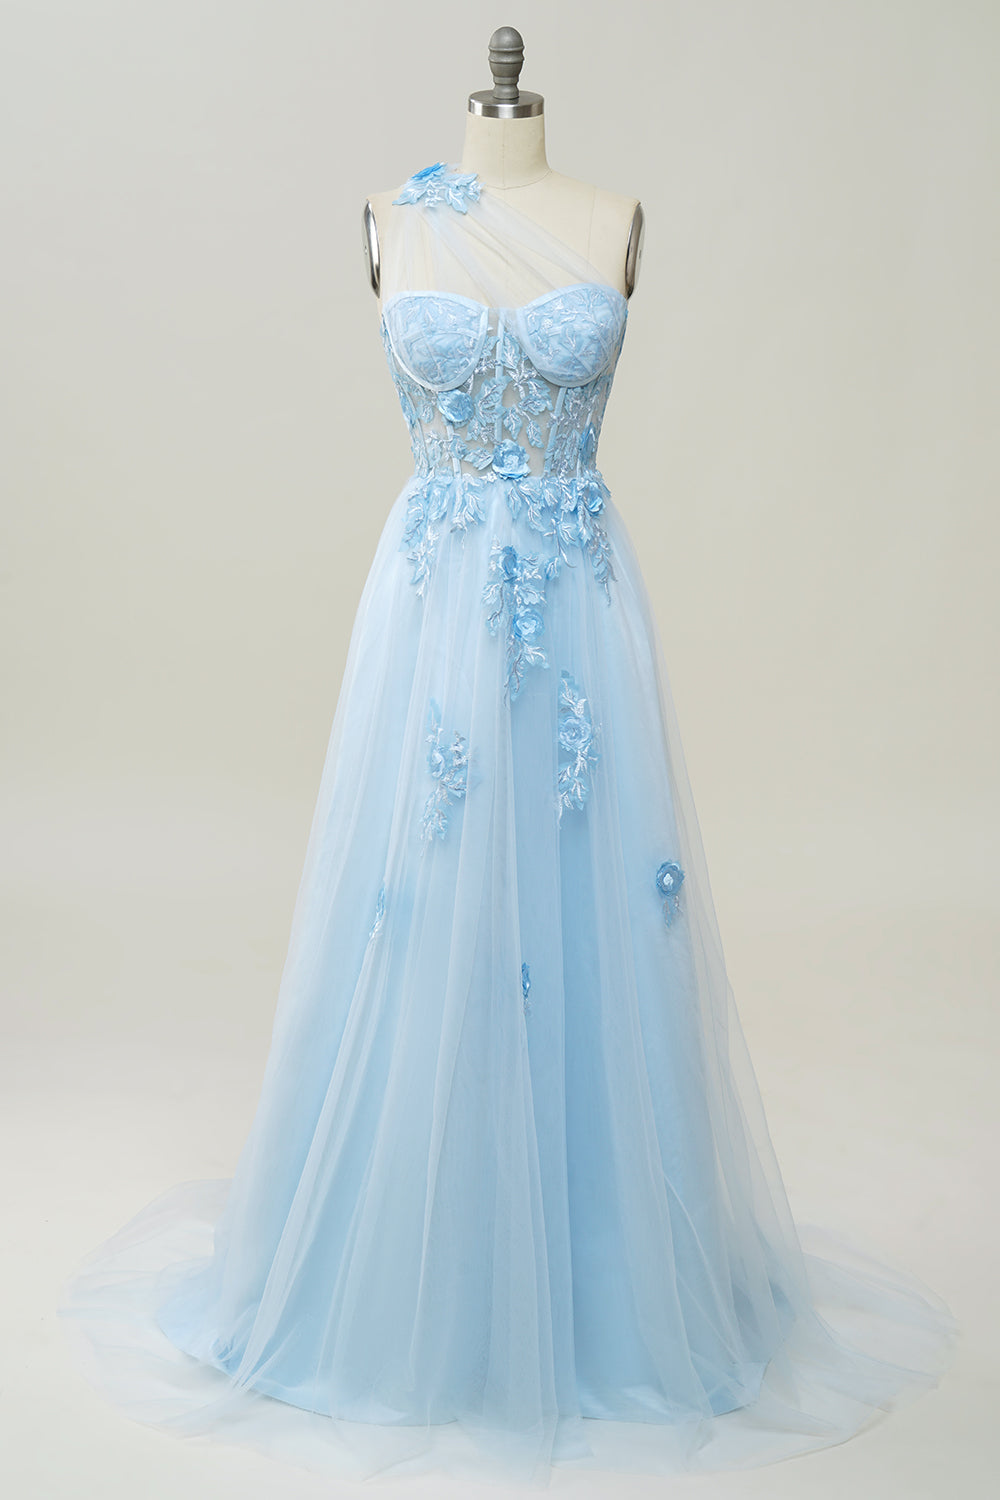 Bridesmaid Dress With Lace, A Line One Shoulder Sky Blue Long Prom Dress with Appliques